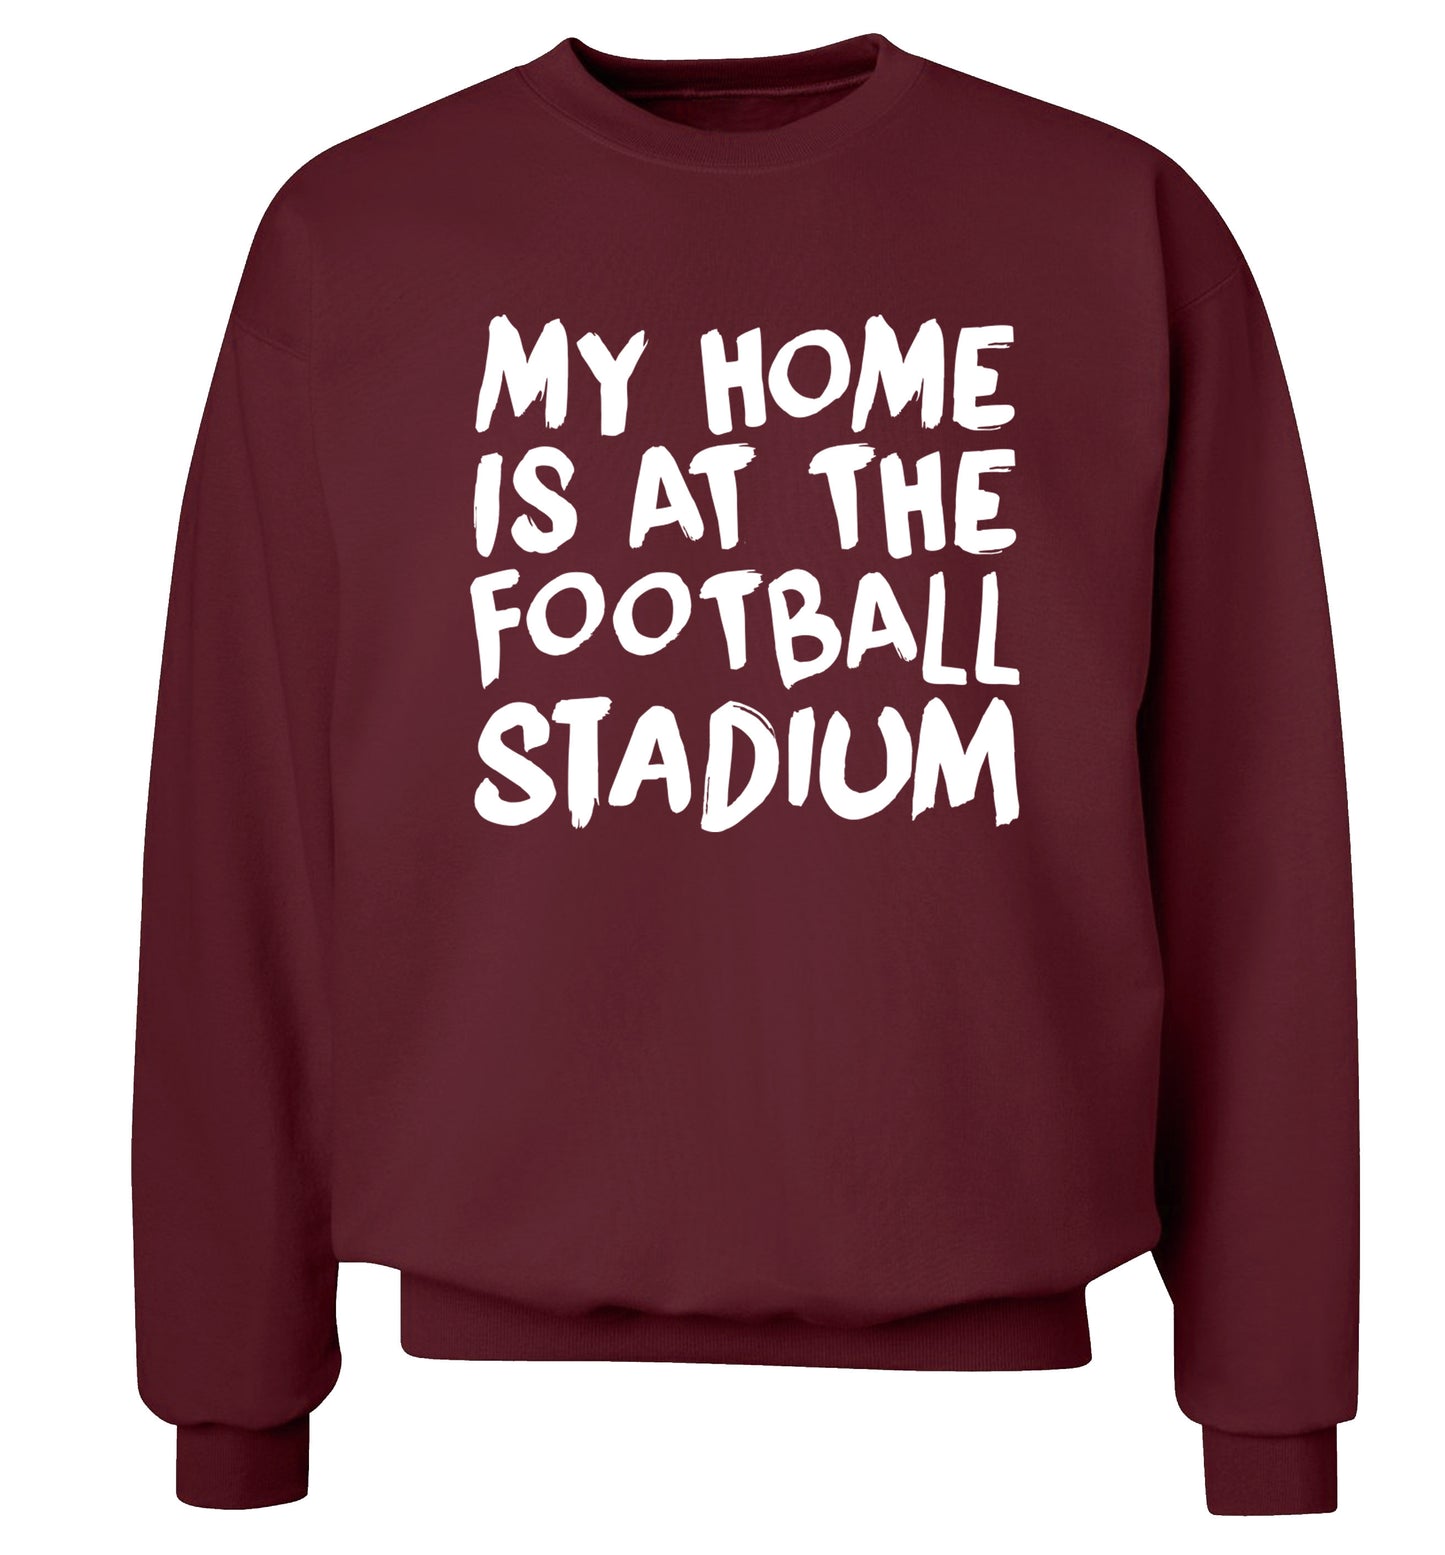 My home is at the football stadium Adult's unisex maroon Sweater 2XL